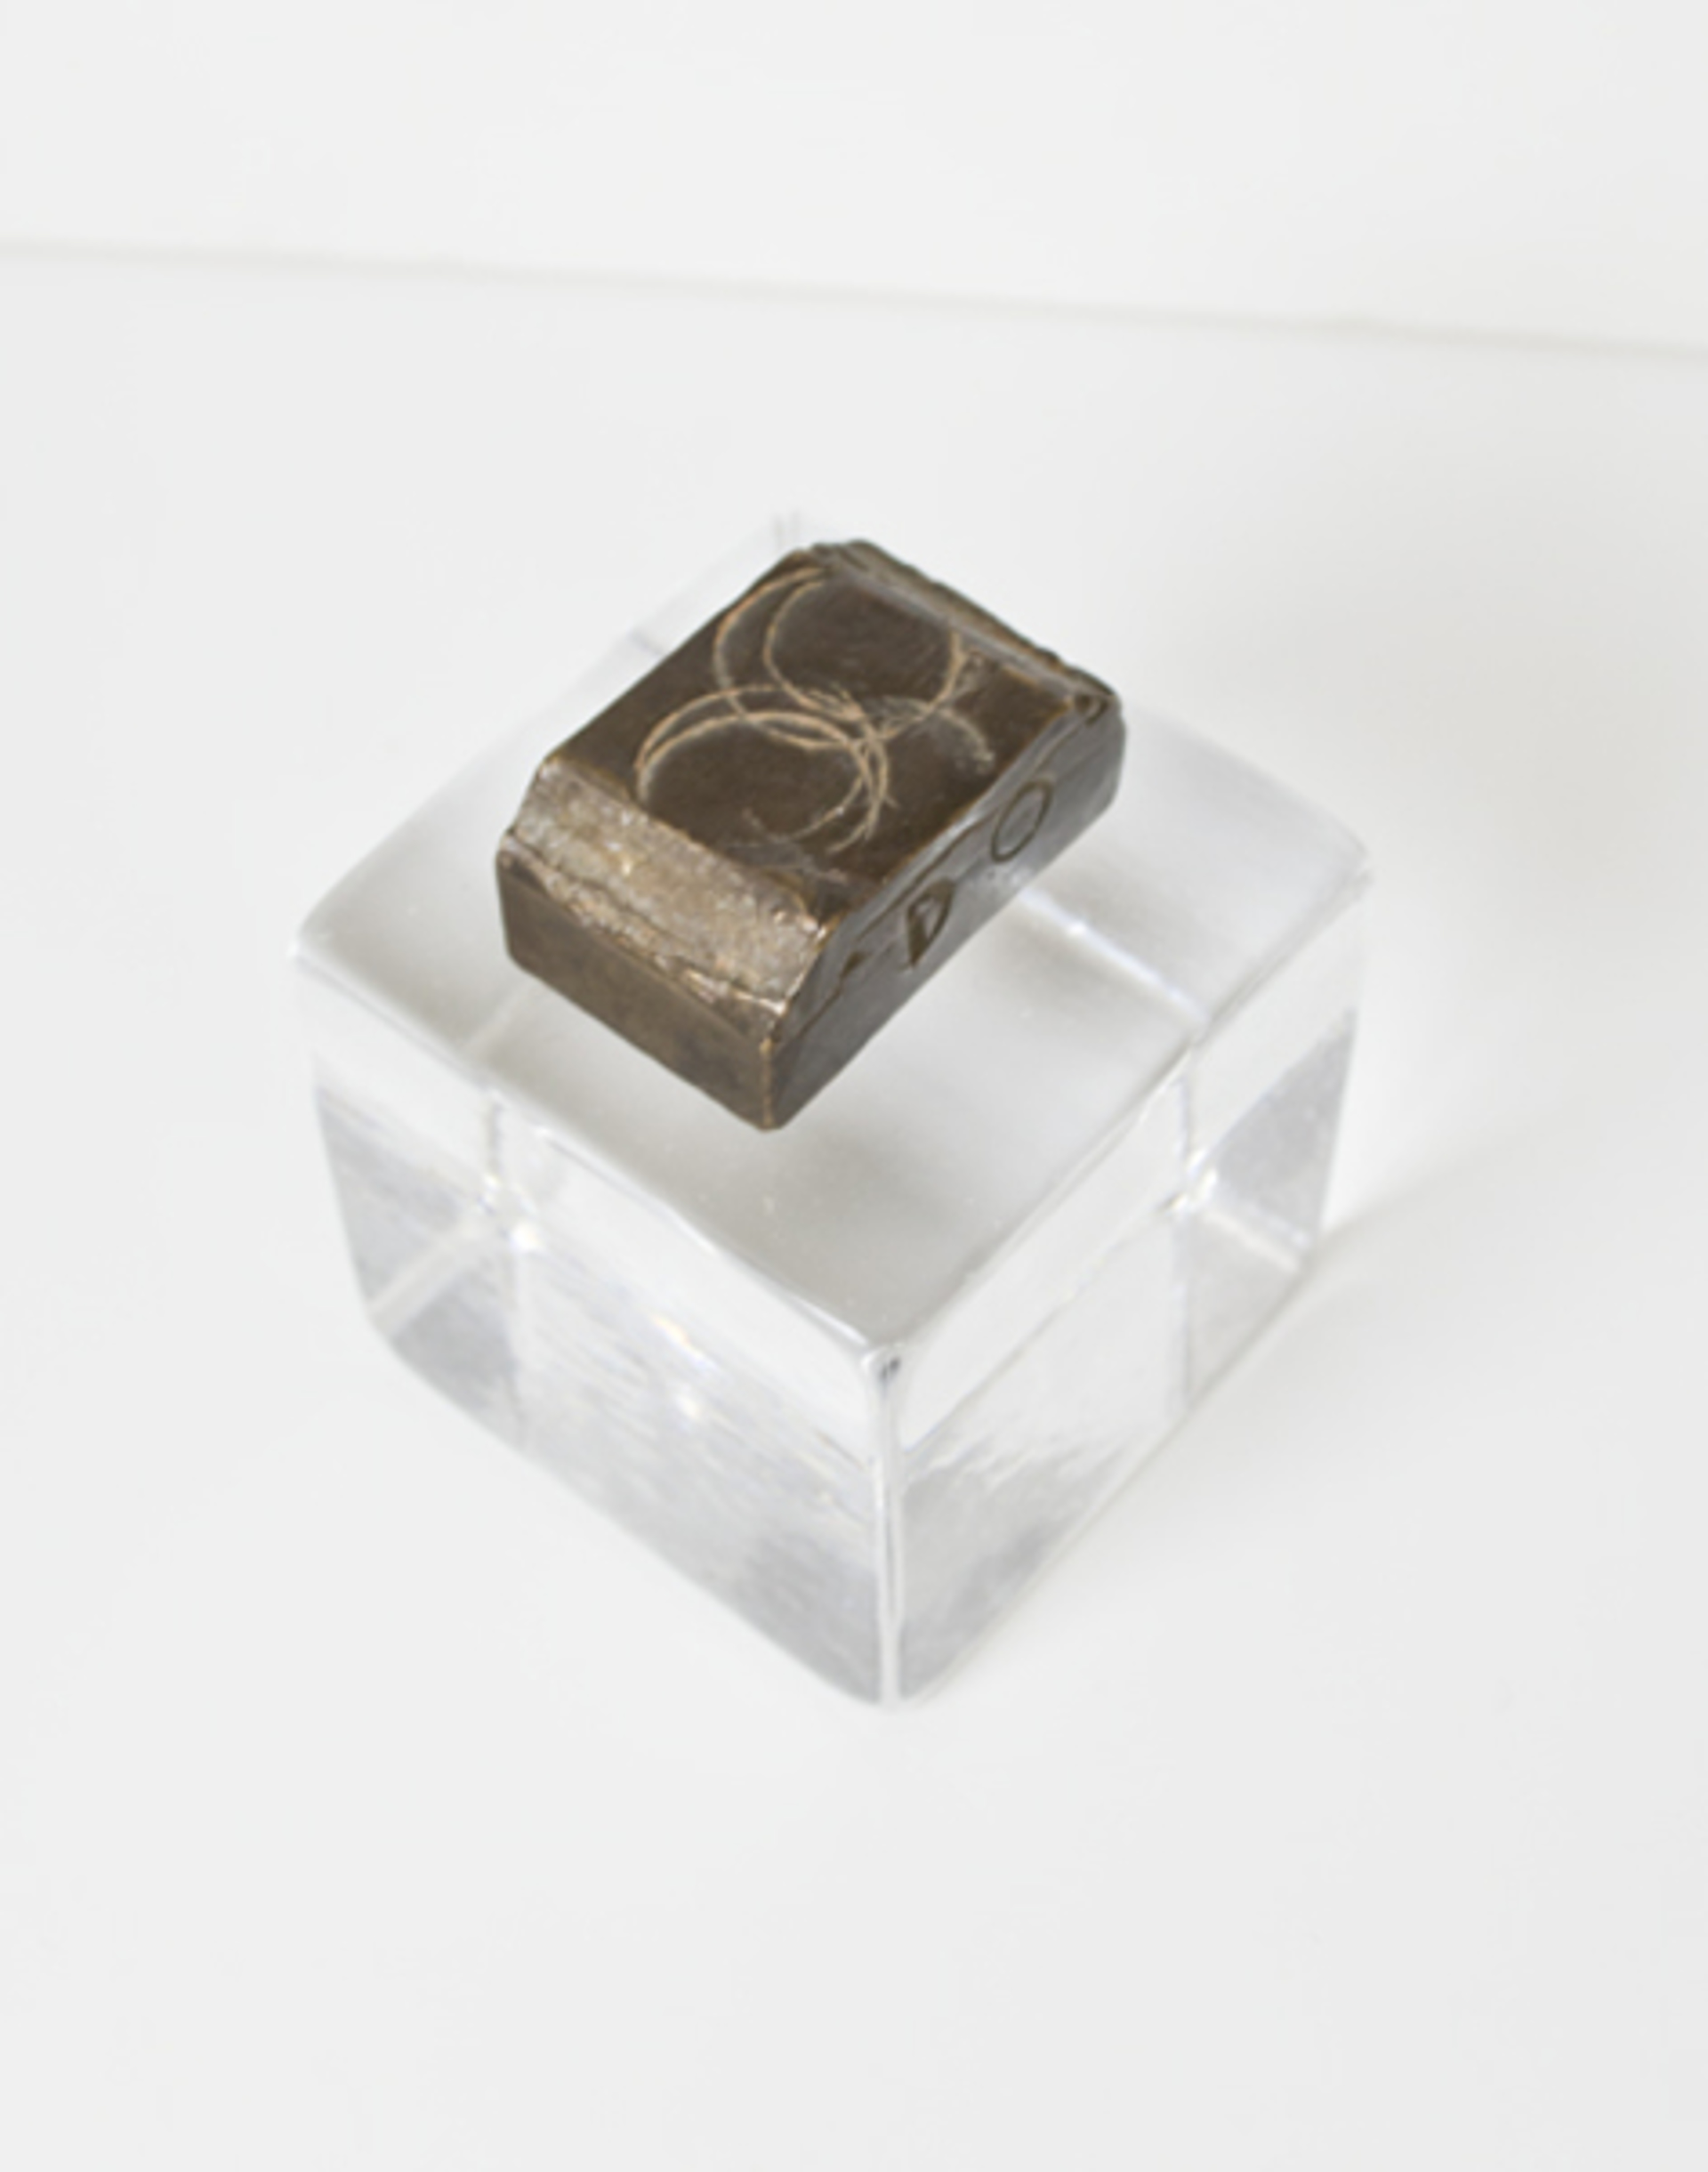 Engraved Cube Ashanti Weight by African